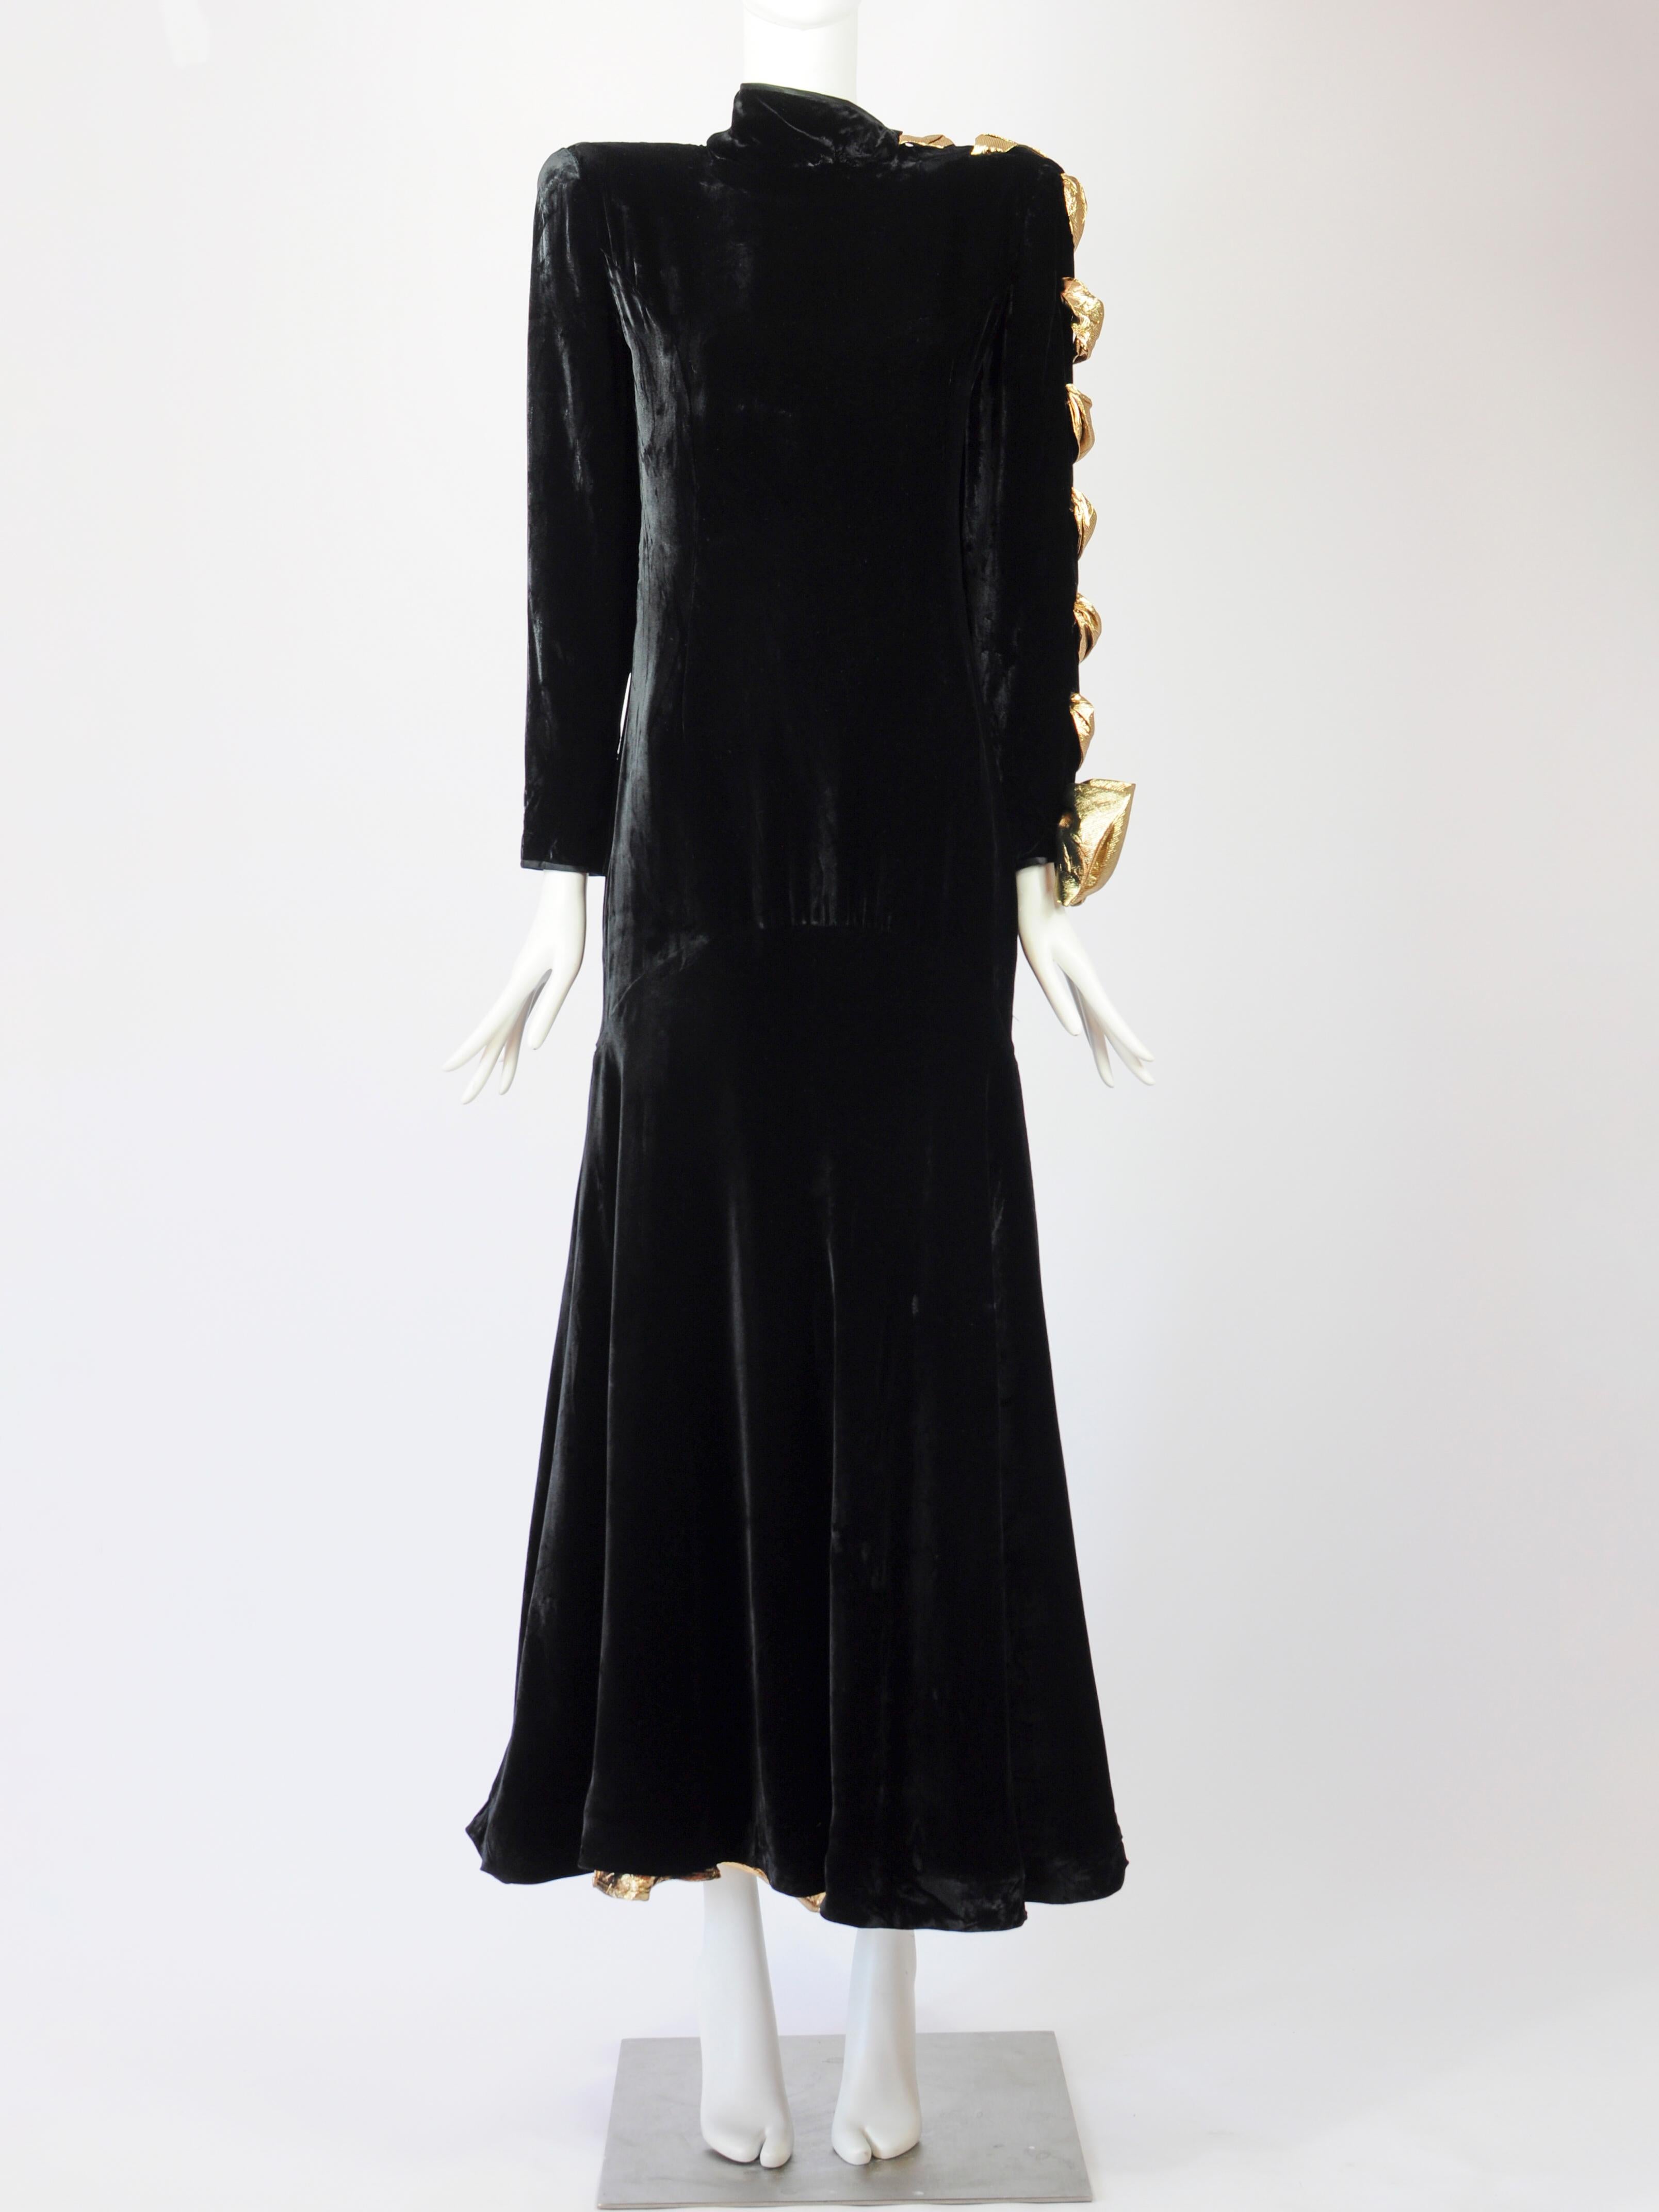 Vintage Valentino Boutique F/W 1987 1988 collection velvet gown with long sleeves and a gold lame bow on one sleeve. The maxi dress has an asymetric collar, padded shoulders, a dropped waist and a generous skirt. The skirt has a gold layer